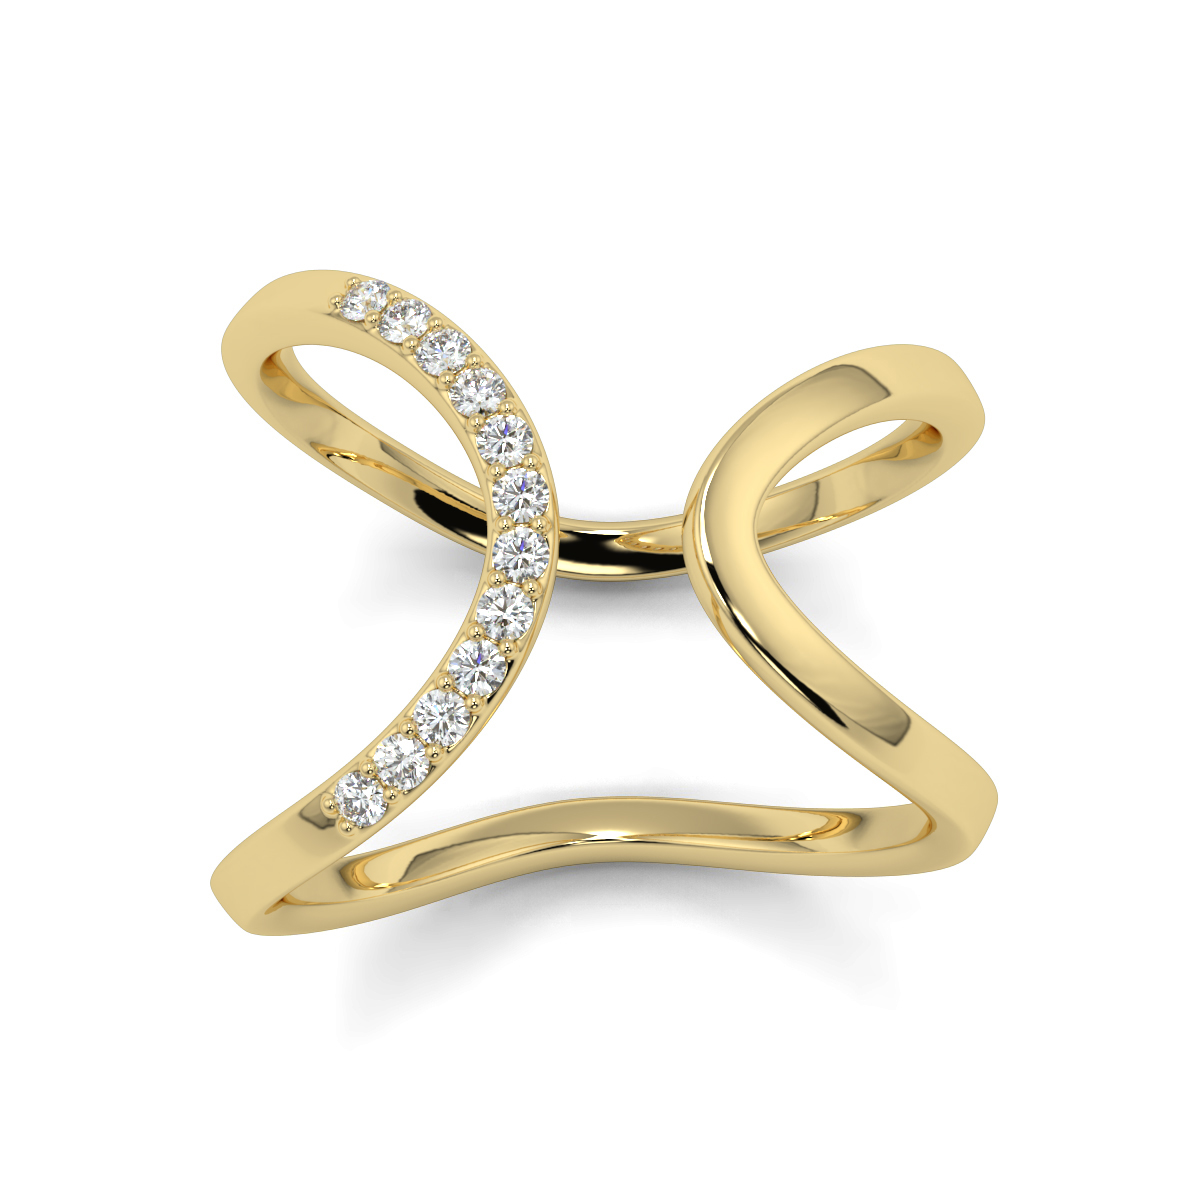 Get The Best Designs of Gold Rings Online - Market Business News